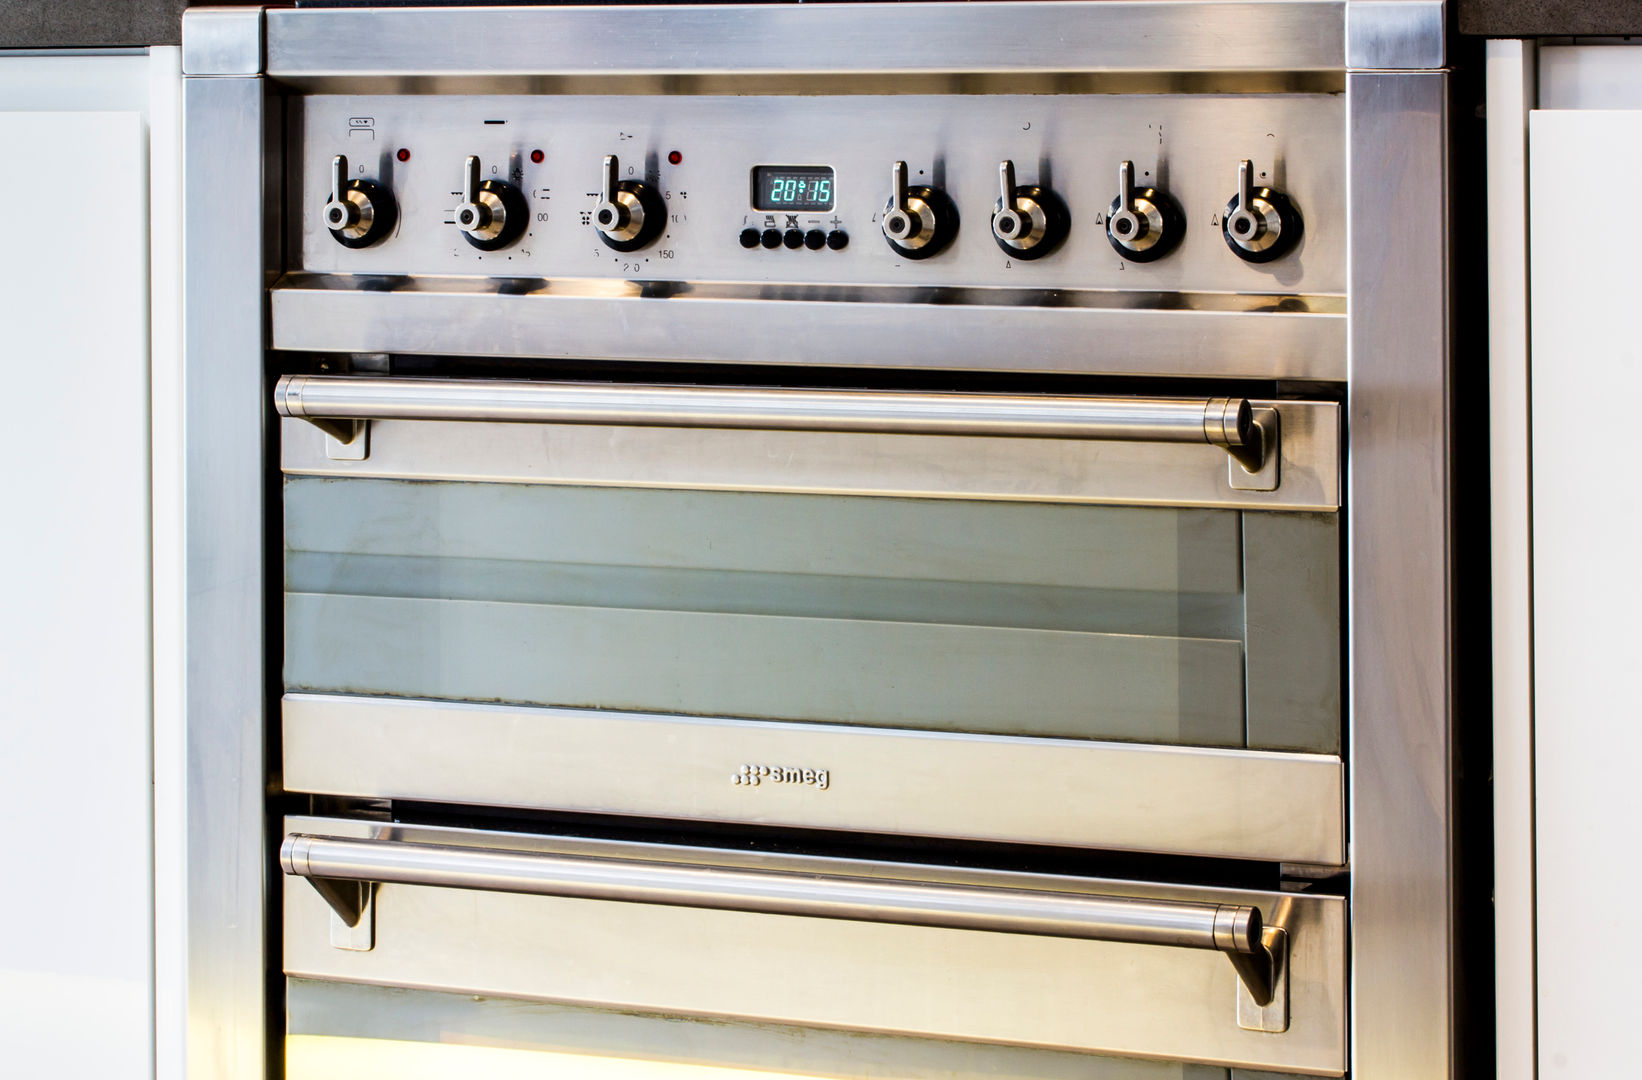 Modern cooker and oven Affleck Property Services Dapur Modern Accessories & textiles